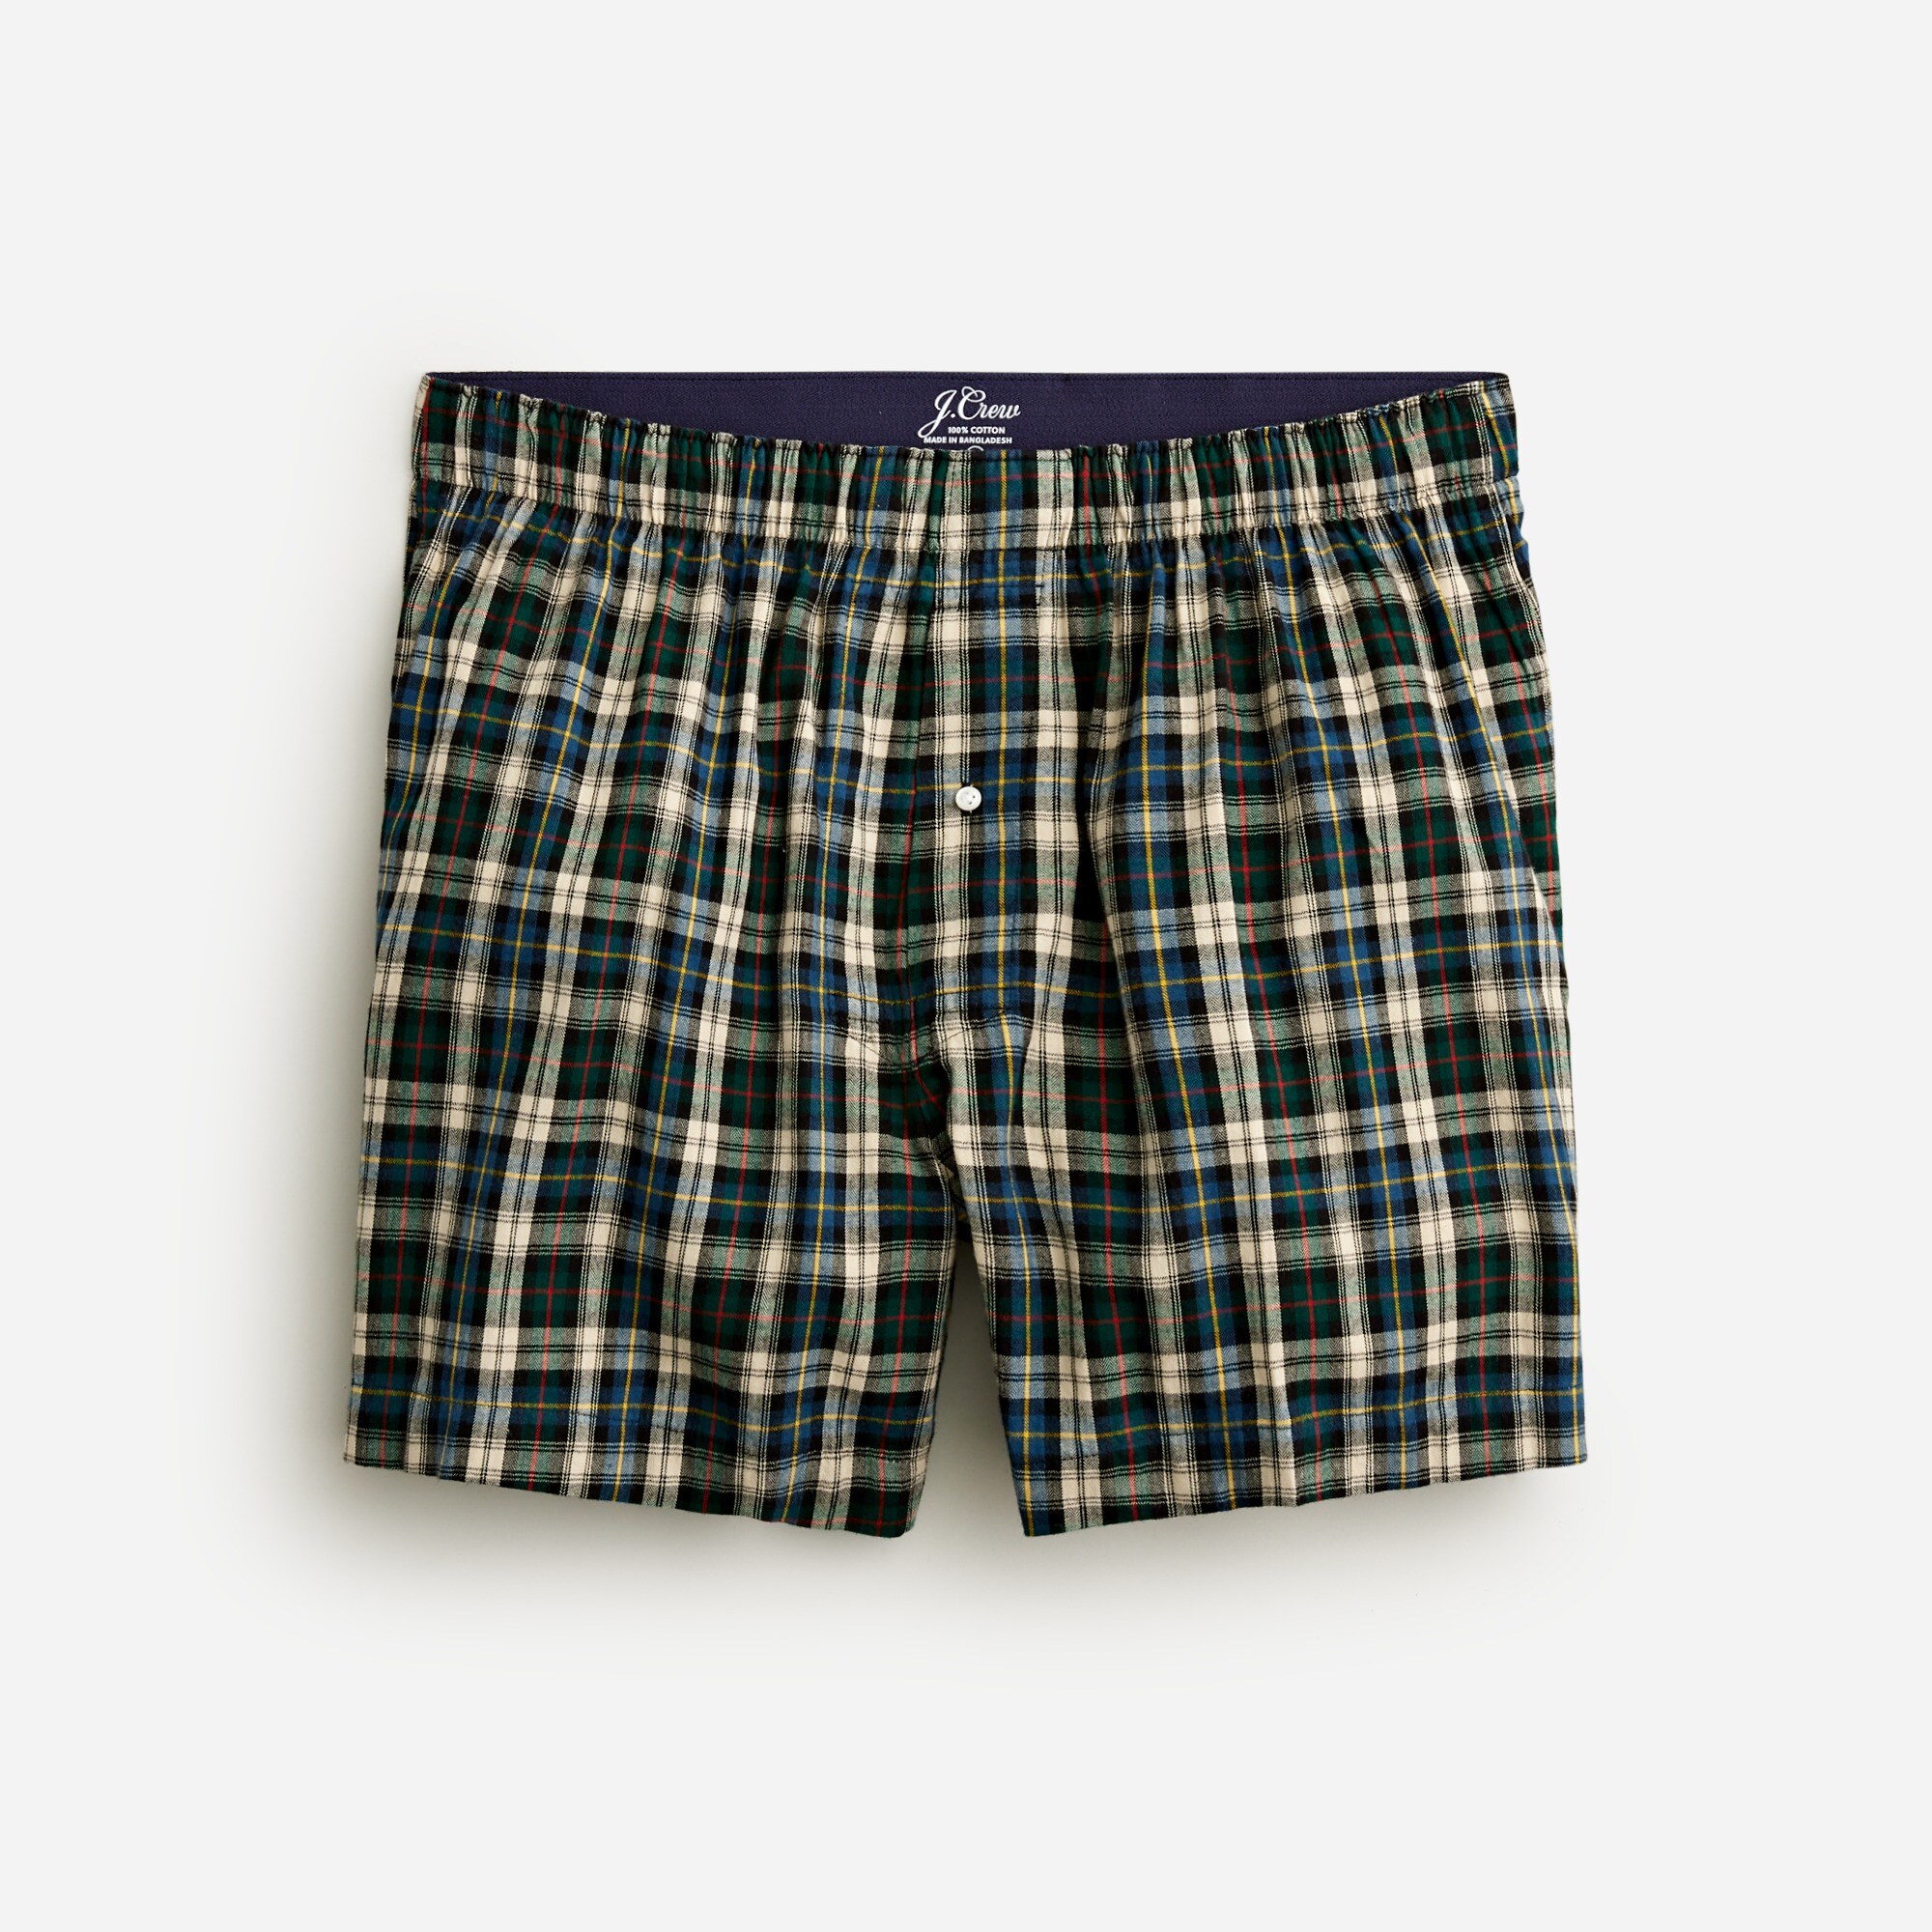  Brushed twill boxers